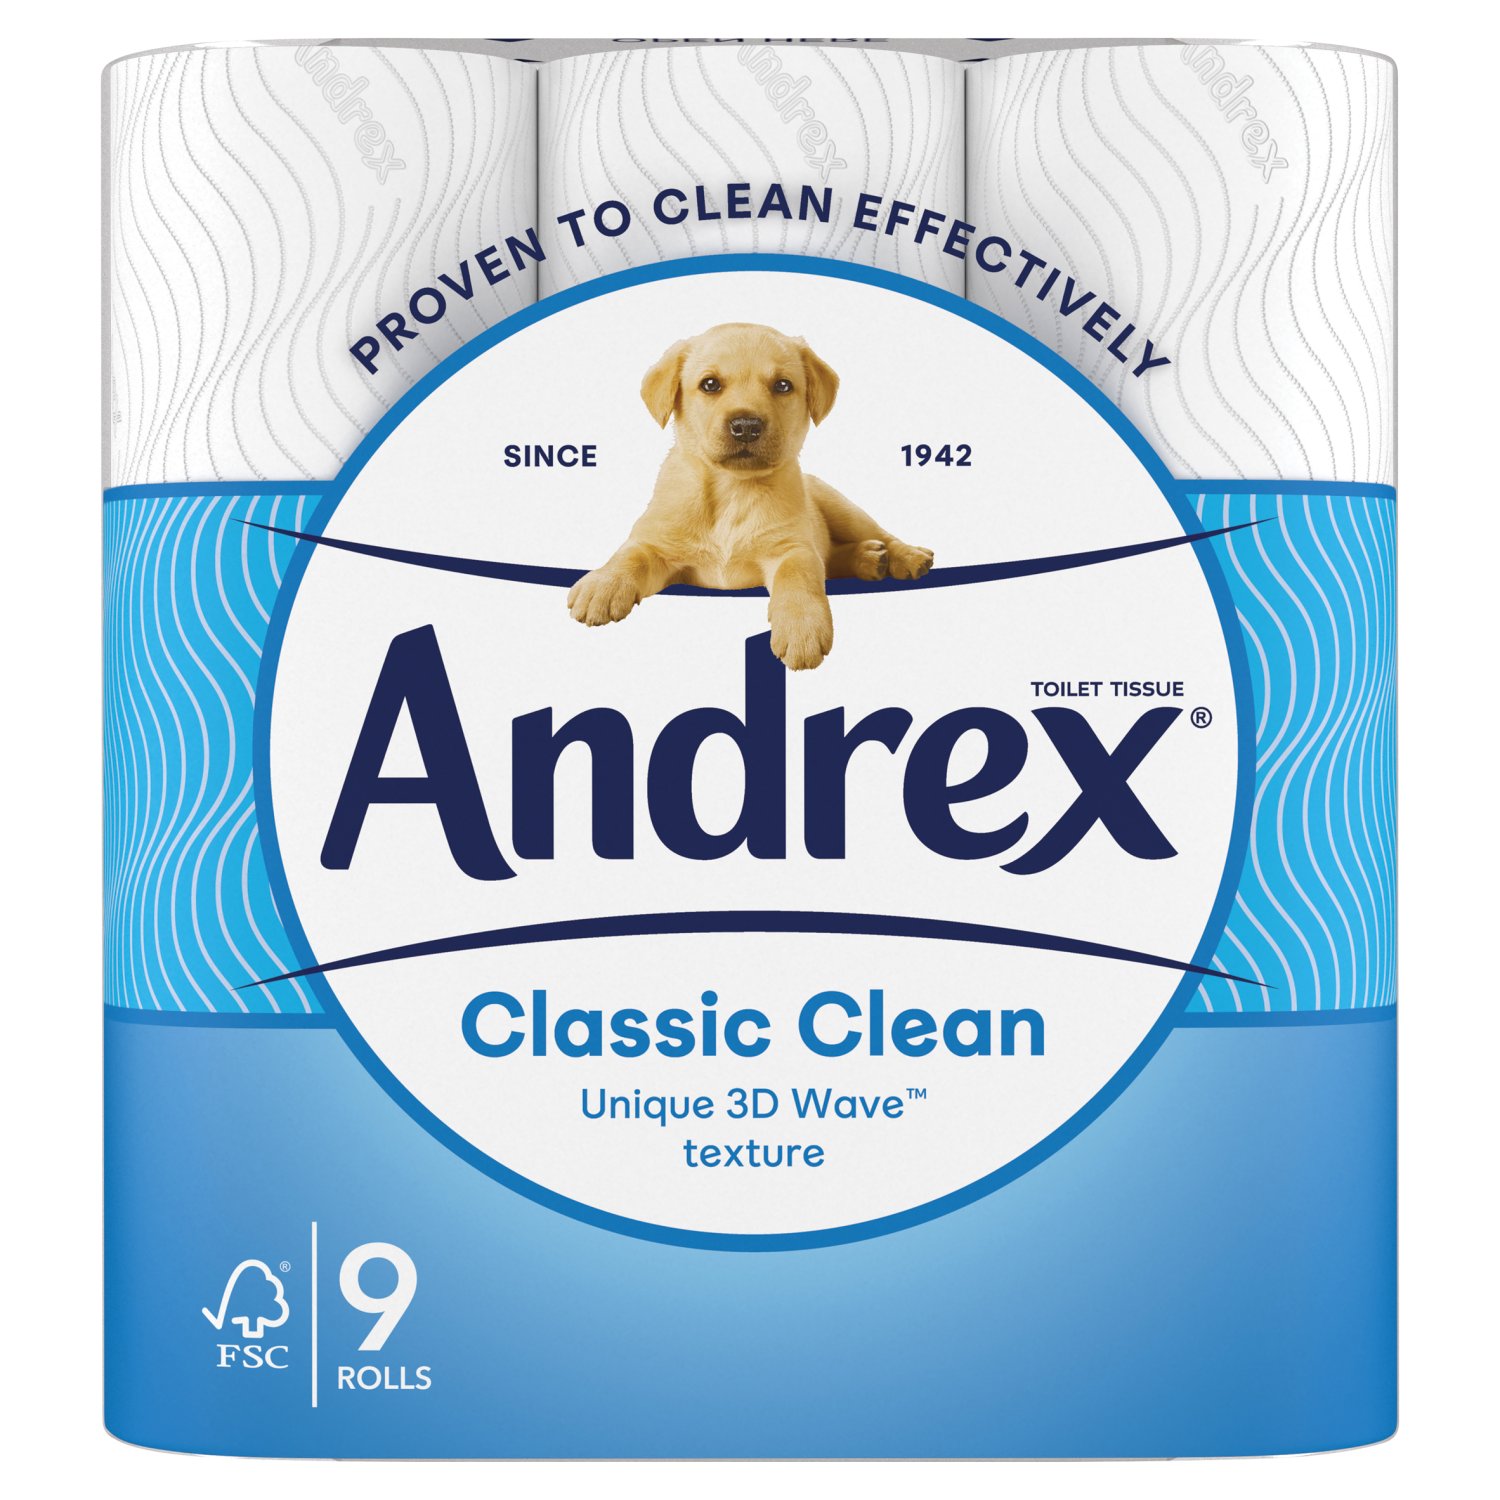 Andrex® wants you to feel clean and confident every day. Each sheet of Andrex® Classic Clean Toilet Tissue features our unique 3D Wave™ texture that is proven to clean effectively, giving you a better clean with fewer sheets.
Every pack of Andrex® Classic Clean Toilet Tissue is made using at least 30% recycled plastic and is still 100% recyclable. Visit our website to find out more about our 2030 sustainability mission and how we are leaving a greener pawprint.
Use Andrex® Toilet Tissue and Andrex® Washlets™ Moist Toilet Tissue for all day freshness†.
*compared with previous Andrex® Classic Clean †vs. using Dry Bath Tissue alone.

Use Andrex® Toilet Tissue and Andrex® Washlets™ Moist Toilet Tissue for all day freshness* (*vs. using Dry Bath Tissue alone)